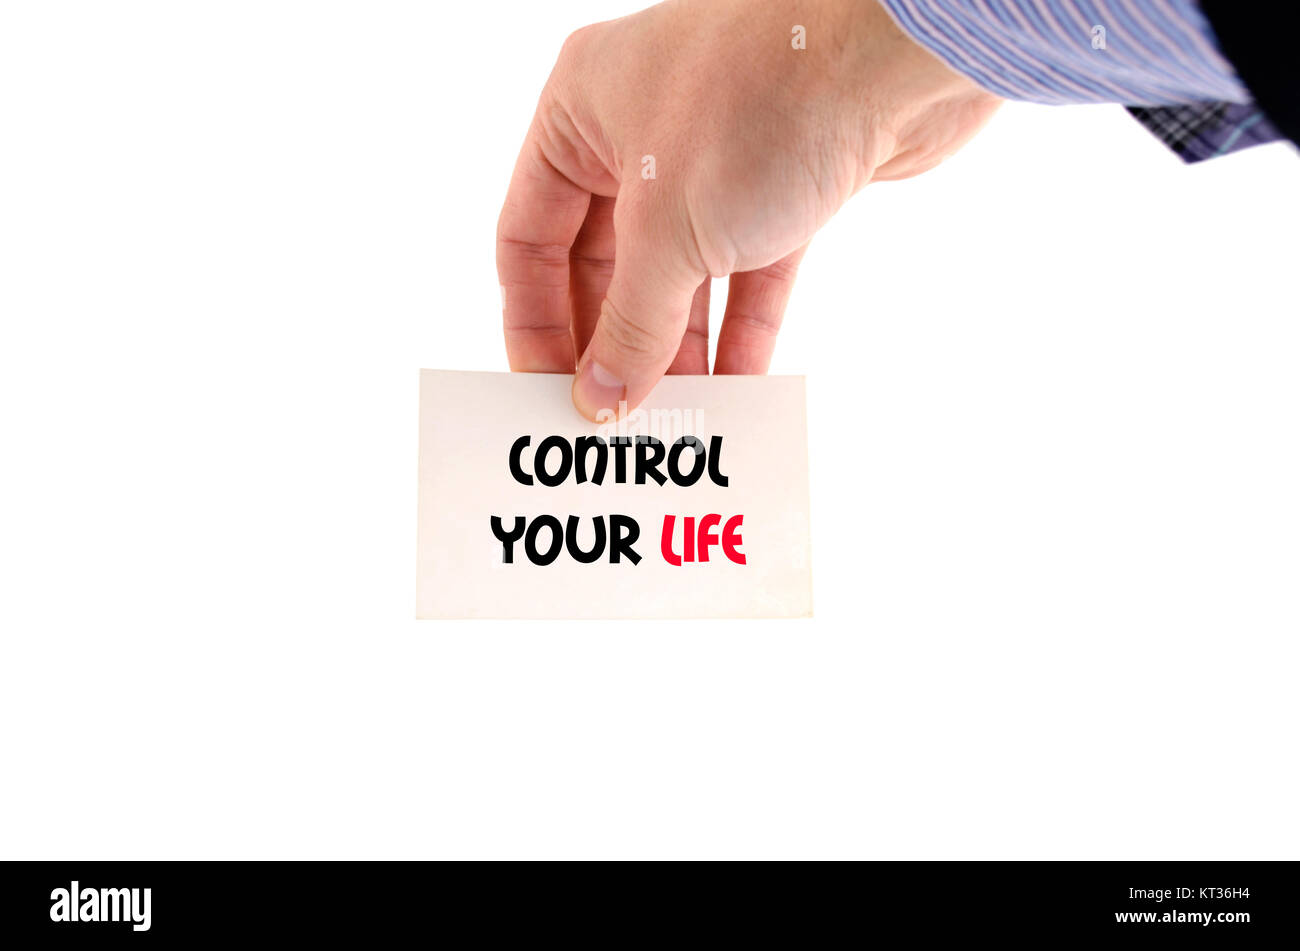 Control your life text concept Stock Photo